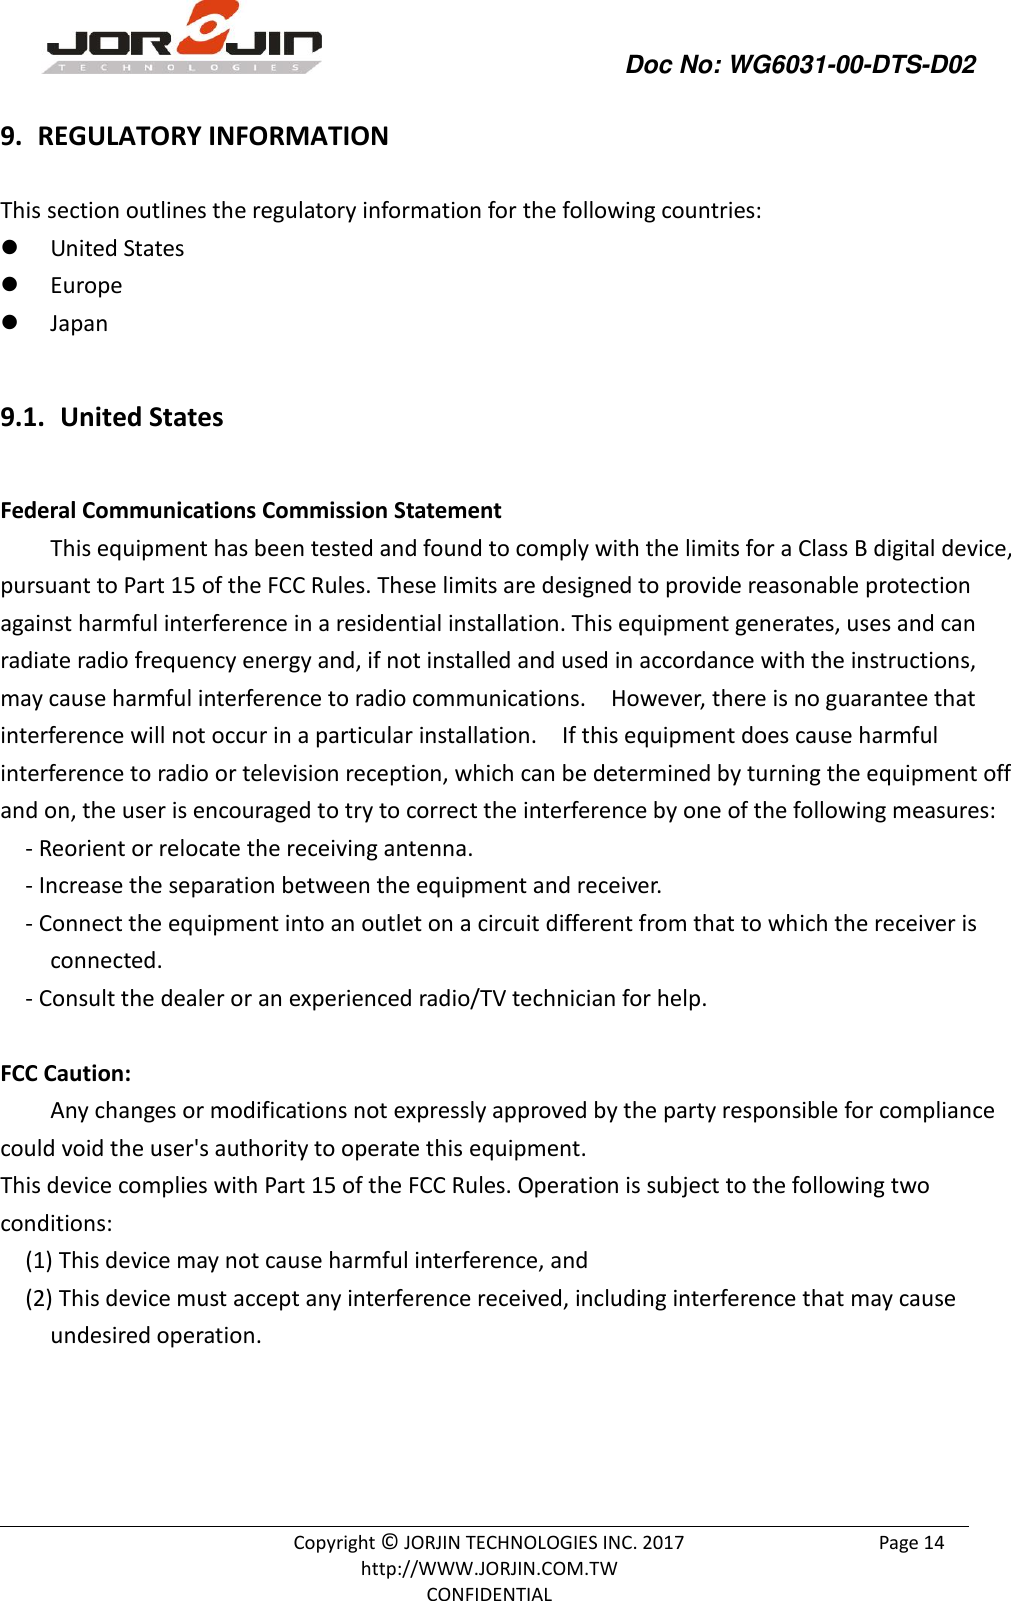                Doc No: WG6031-00-DTS-D02                                                                                               Copyright © JORJIN TECHNOLOGIES INC. 2017 http://WWW.JORJIN.COM.TW CONFIDENTIAL Page 14 9.  REGULATORY INFORMATION This section outlines the regulatory information for the following countries:  United States  Europe  Japan  9.1.  United States  Federal Communications Commission Statement This equipment has been tested and found to comply with the limits for a Class B digital device, pursuant to Part 15 of the FCC Rules. These limits are designed to provide reasonable protection against harmful interference in a residential installation. This equipment generates, uses and can radiate radio frequency energy and, if not installed and used in accordance with the instructions, may cause harmful interference to radio communications.    However, there is no guarantee that interference will not occur in a particular installation.    If this equipment does cause harmful interference to radio or television reception, which can be determined by turning the equipment off and on, the user is encouraged to try to correct the interference by one of the following measures:   - Reorient or relocate the receiving antenna.   - Increase the separation between the equipment and receiver.   - Connect the equipment into an outlet on a circuit different from that to which the receiver is connected.   - Consult the dealer or an experienced radio/TV technician for help.  FCC Caution:   Any changes or modifications not expressly approved by the party responsible for compliance could void the user&apos;s authority to operate this equipment.   This device complies with Part 15 of the FCC Rules. Operation is subject to the following two conditions:   (1) This device may not cause harmful interference, and (2) This device must accept any interference received, including interference that may cause undesired operation.       